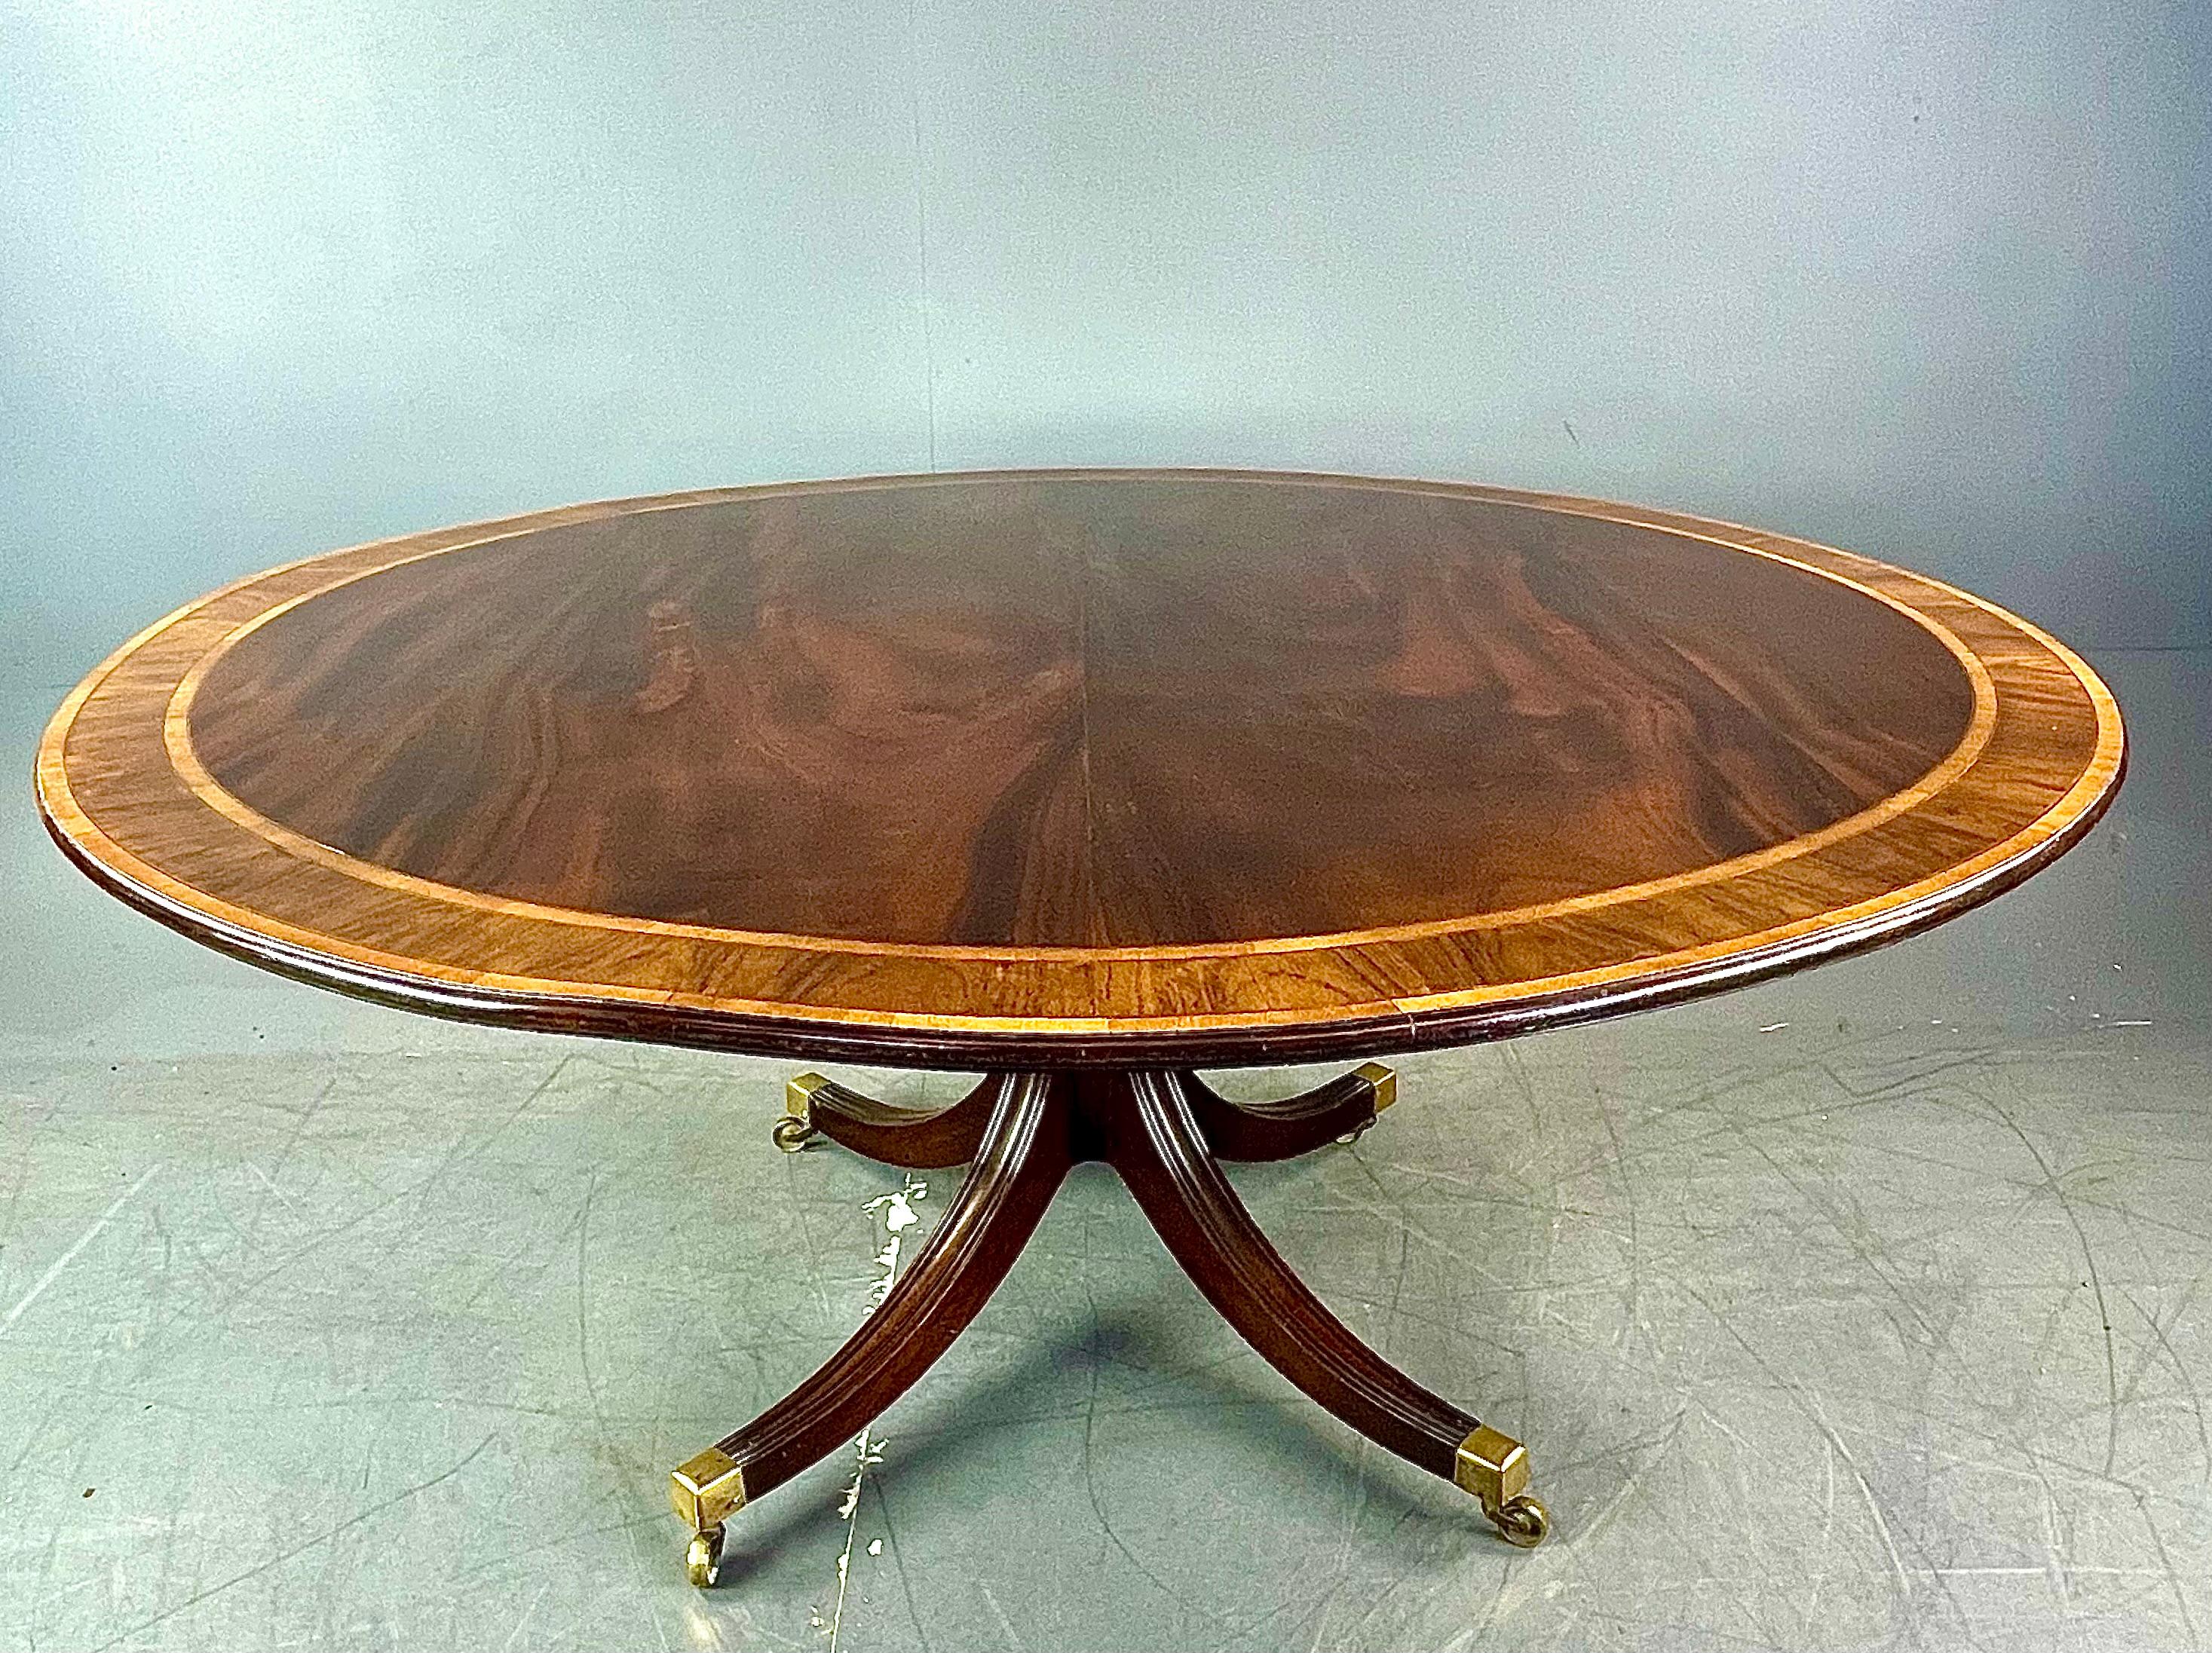 Fine large Regency solid mahogany curcular dining table that will seat eight with comfort being 62 inches diameter .circa 1820
The table has a magnificent solid mahogany top that has a good grain and colour with rosewood and boxwood banding